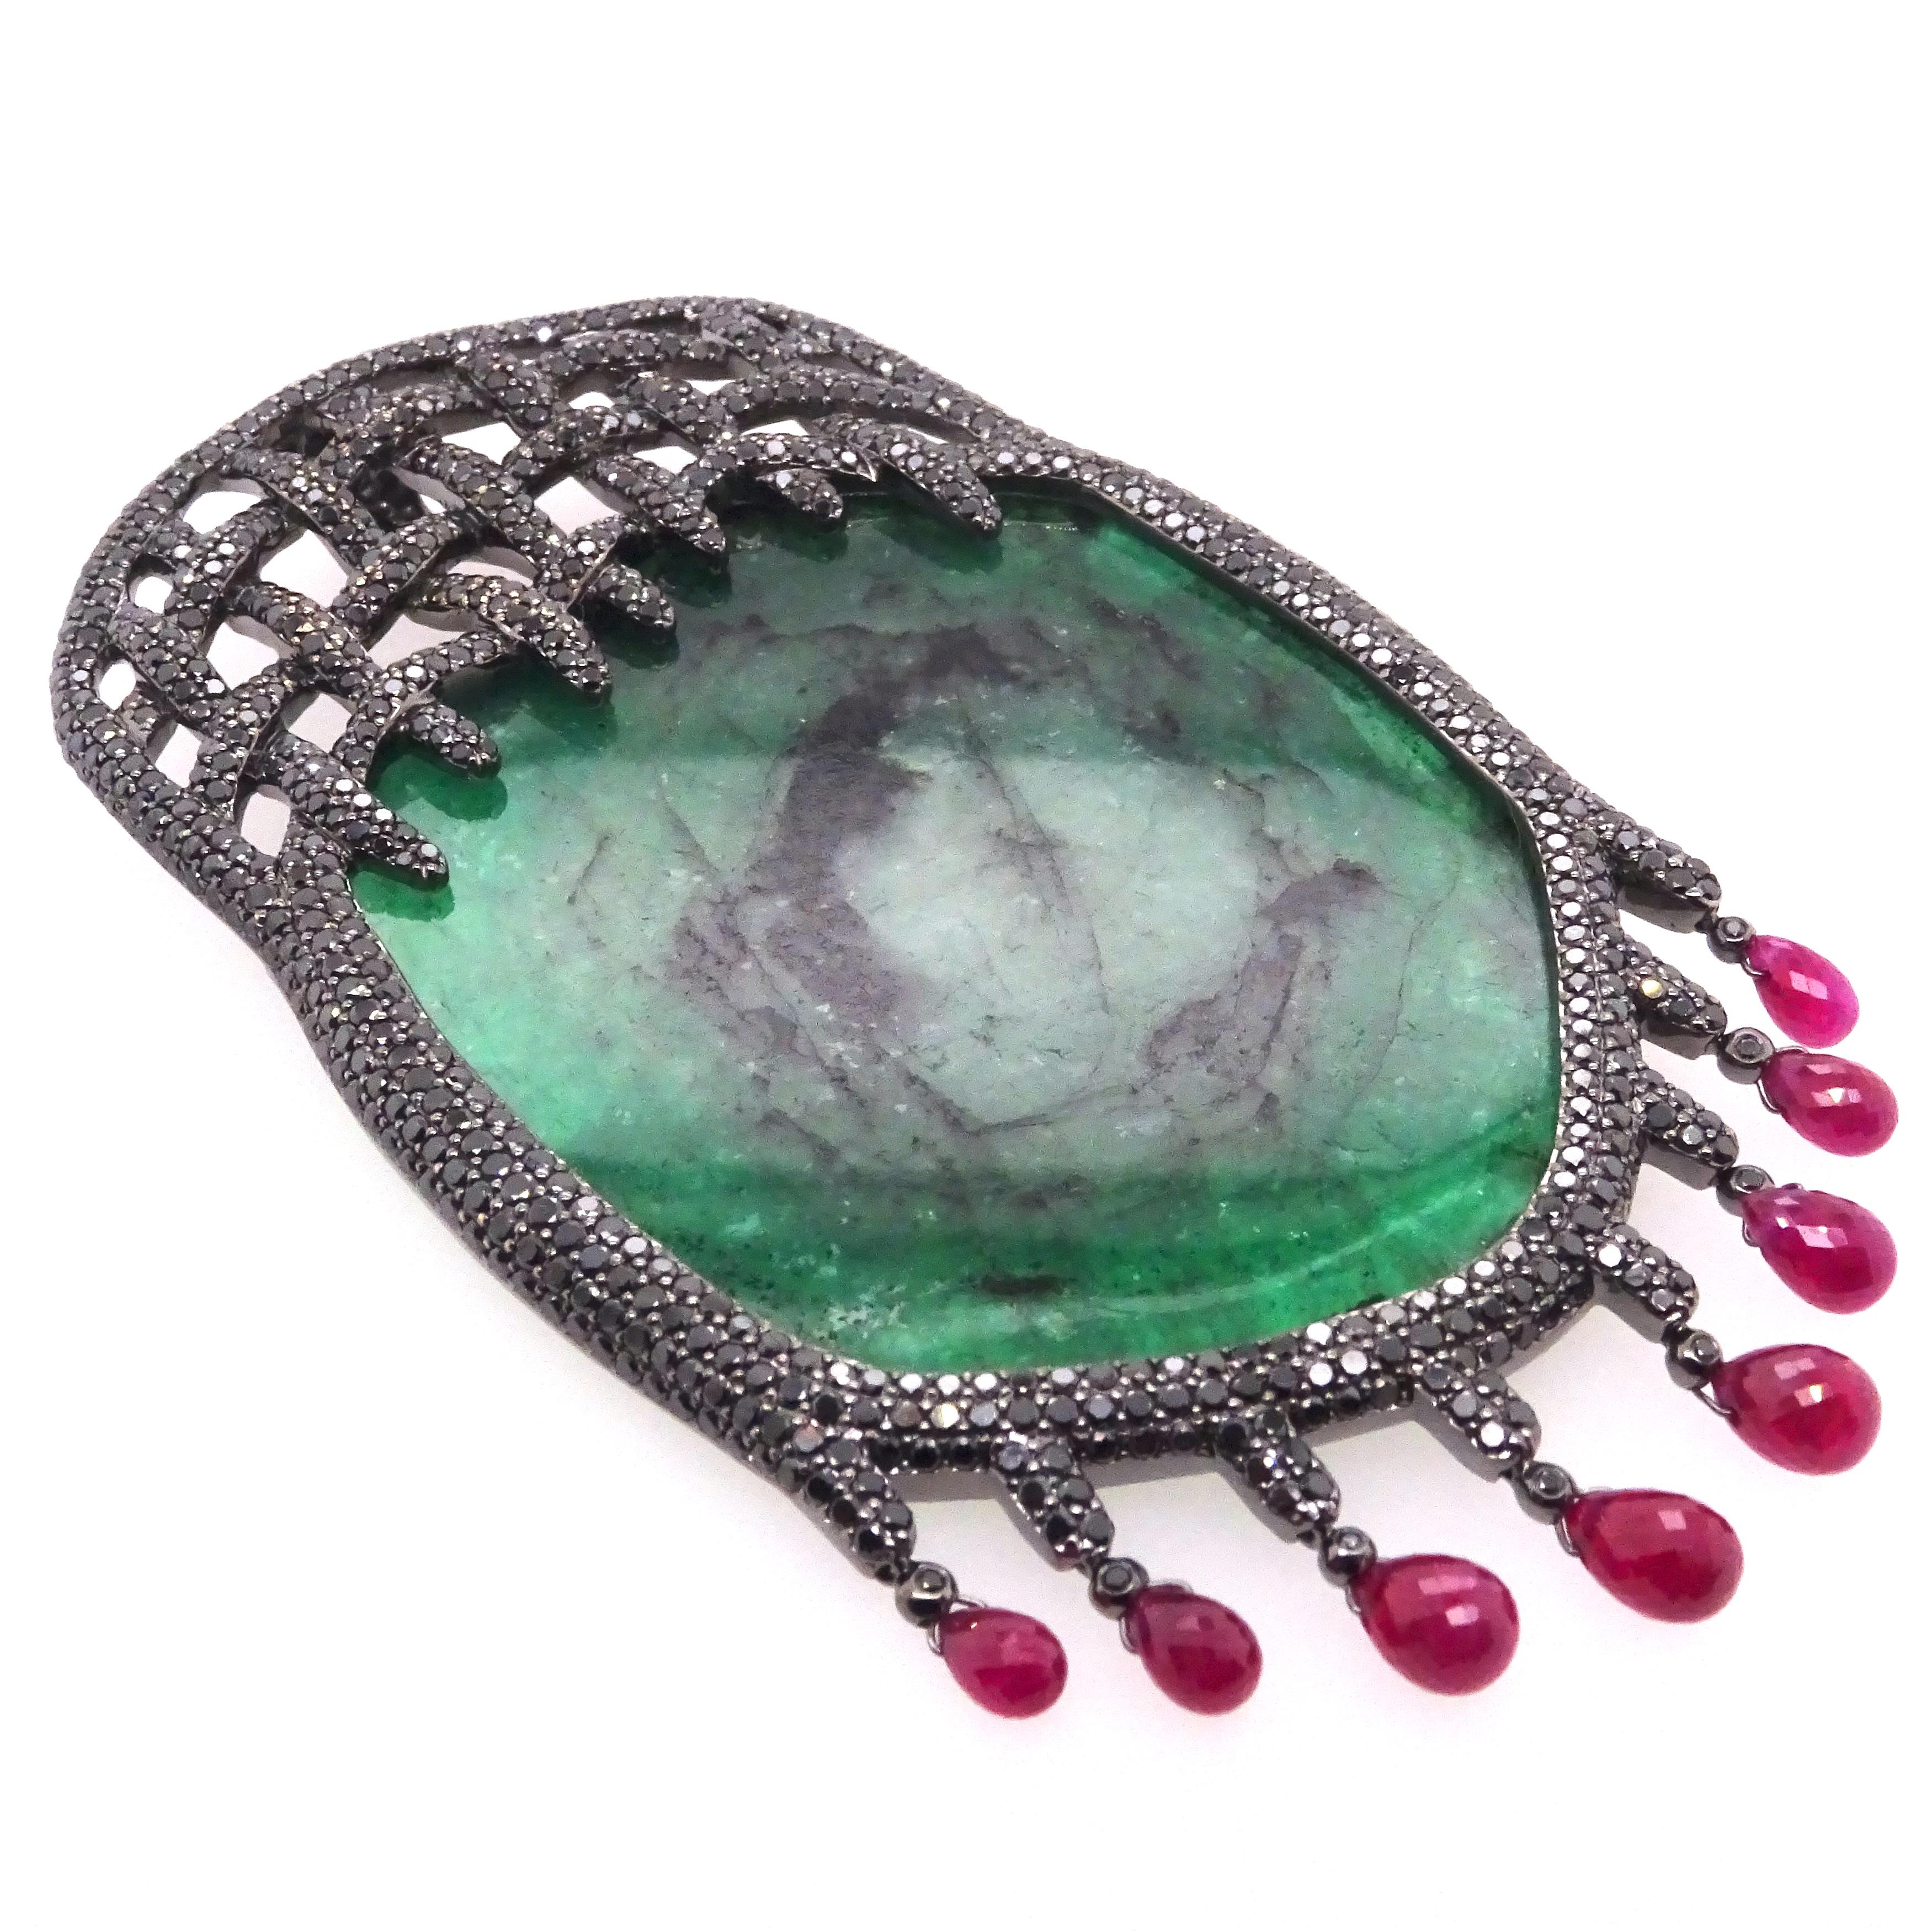 Pure Venom collection by VOTIVE.

Enter the mesmerizing world of VOTIVE's Pure Venom collection, featuring an exquisite blend of emerald, black diamonds, rubies, and 14K yellow gold. The captivating narrative of the Tender Trap Pendant unfolds, as